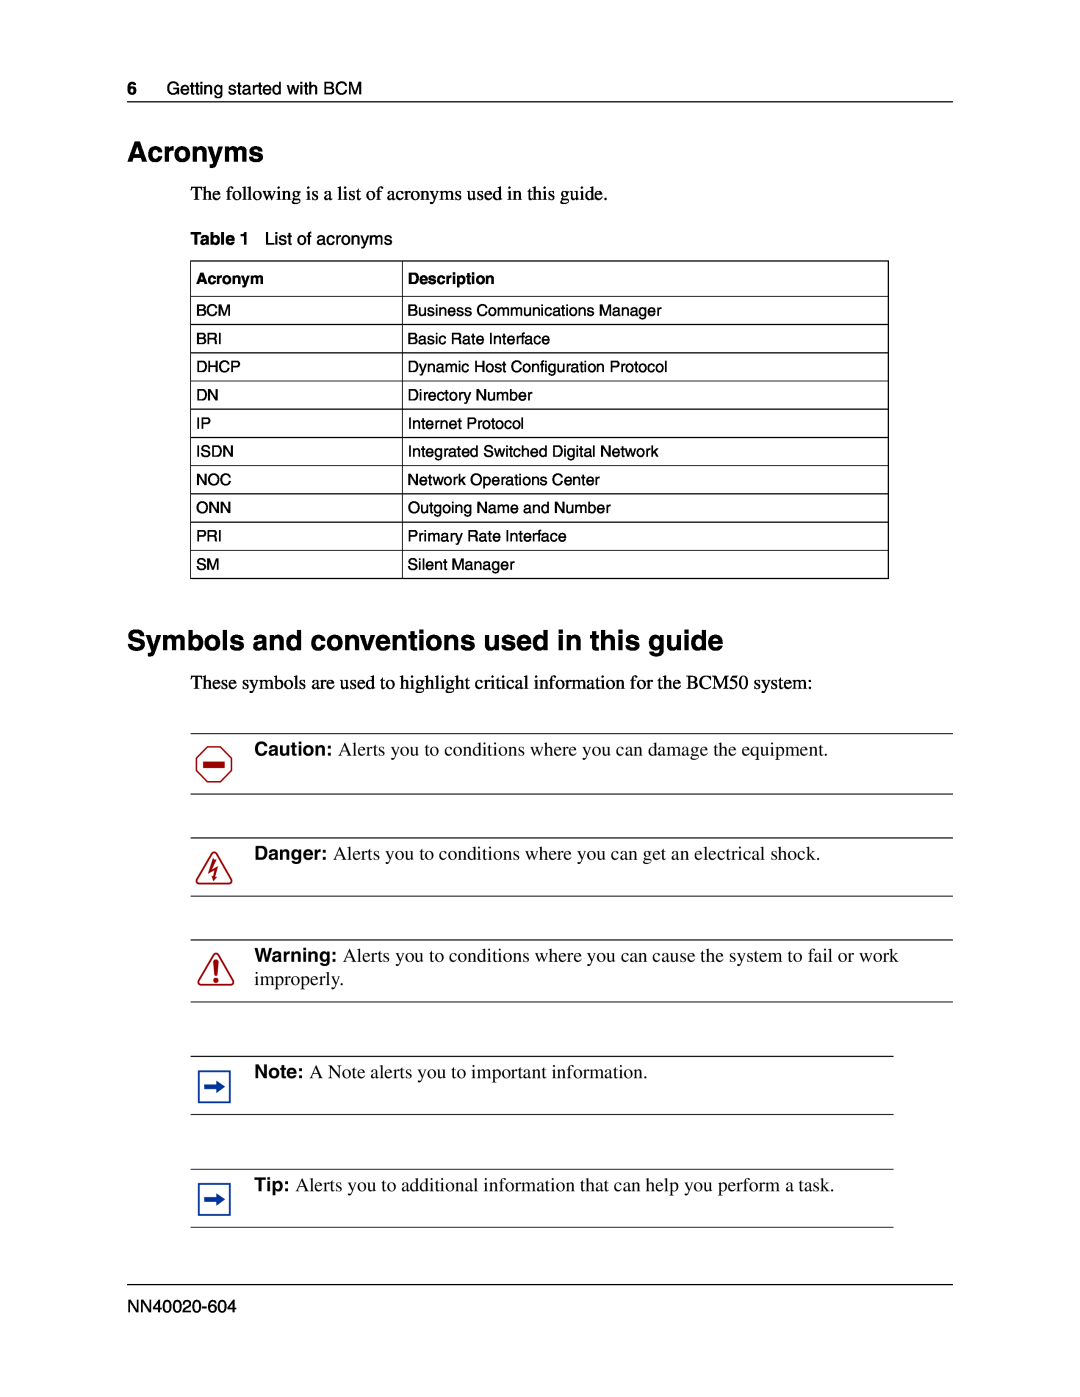 Nortel Networks BCM50 2.0 manual Acronyms, Symbols and conventions used in this guide 